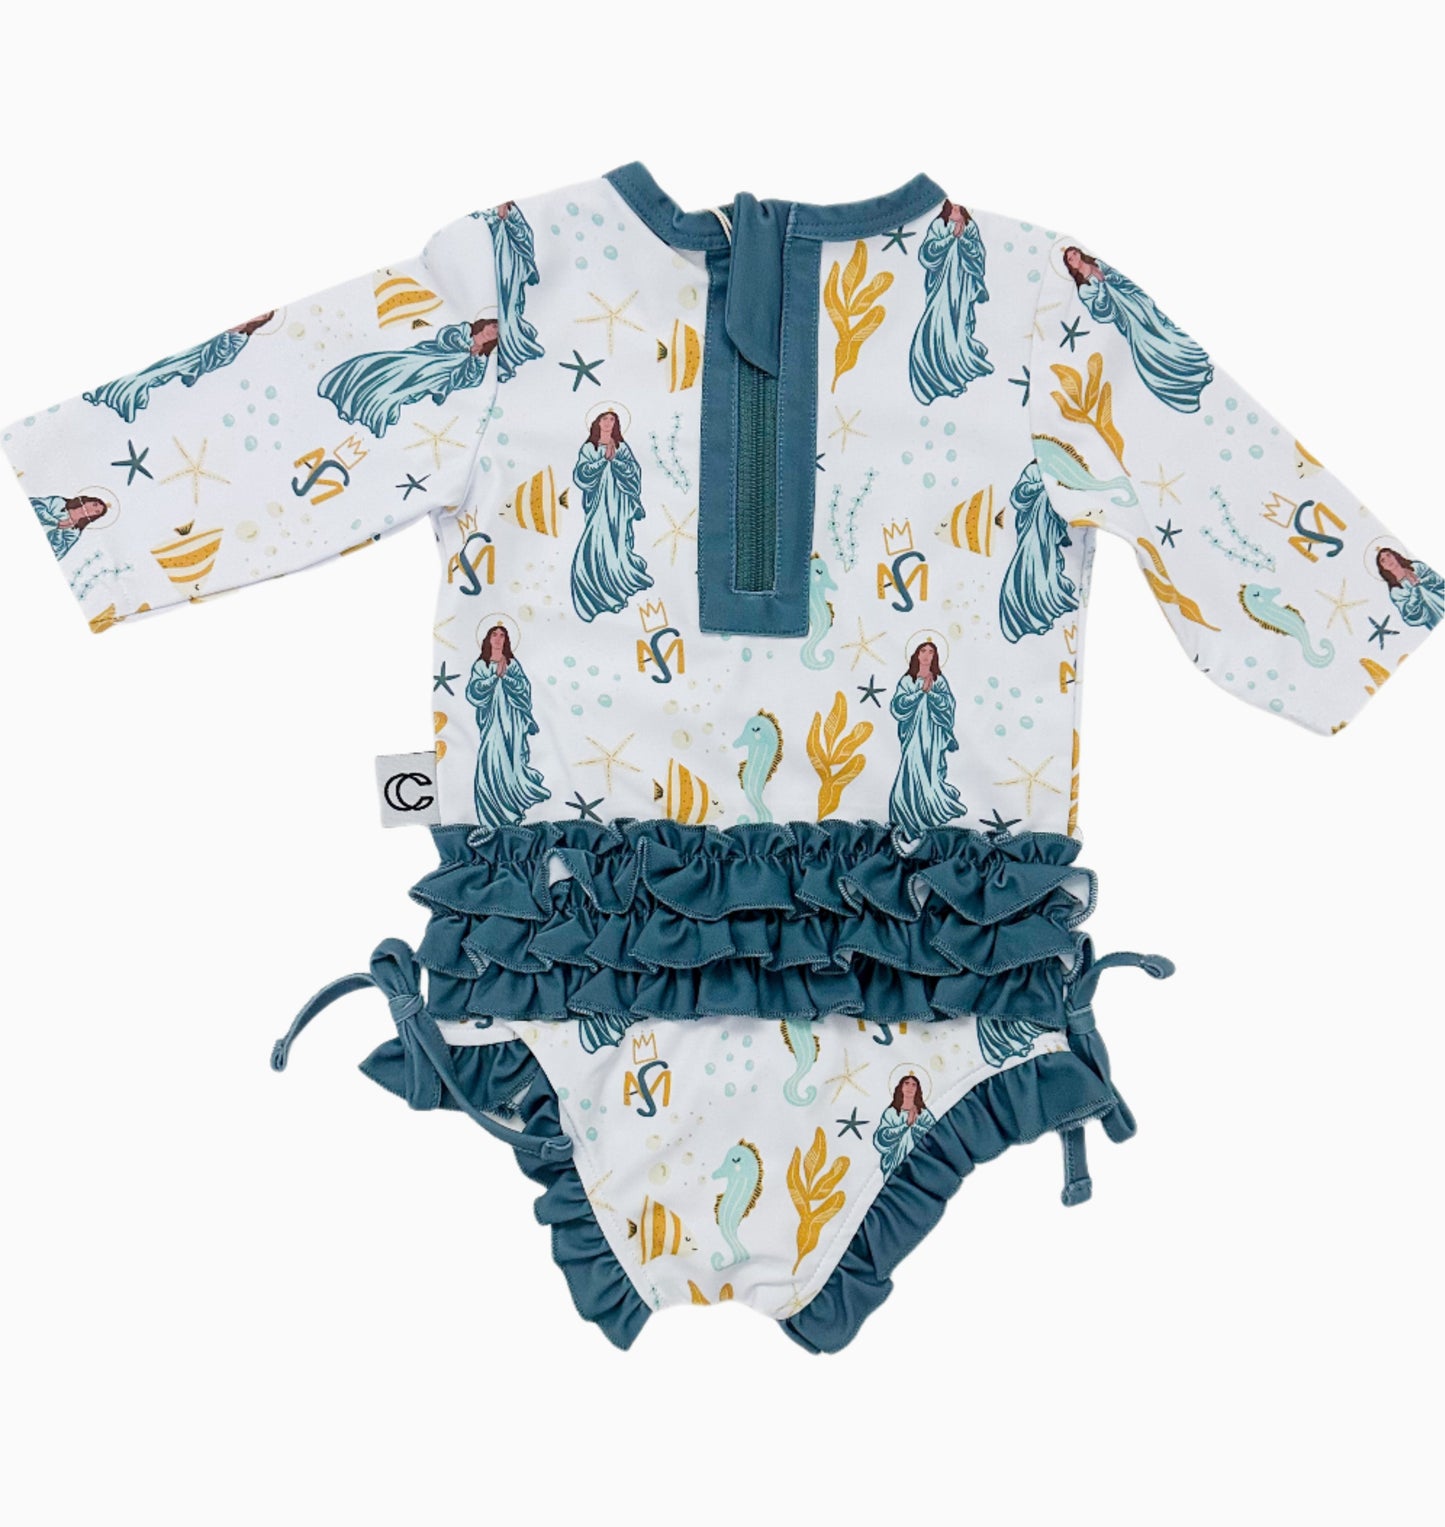 Our Lady Star of the Sea ( Ave Maris Stella) Swimsuit